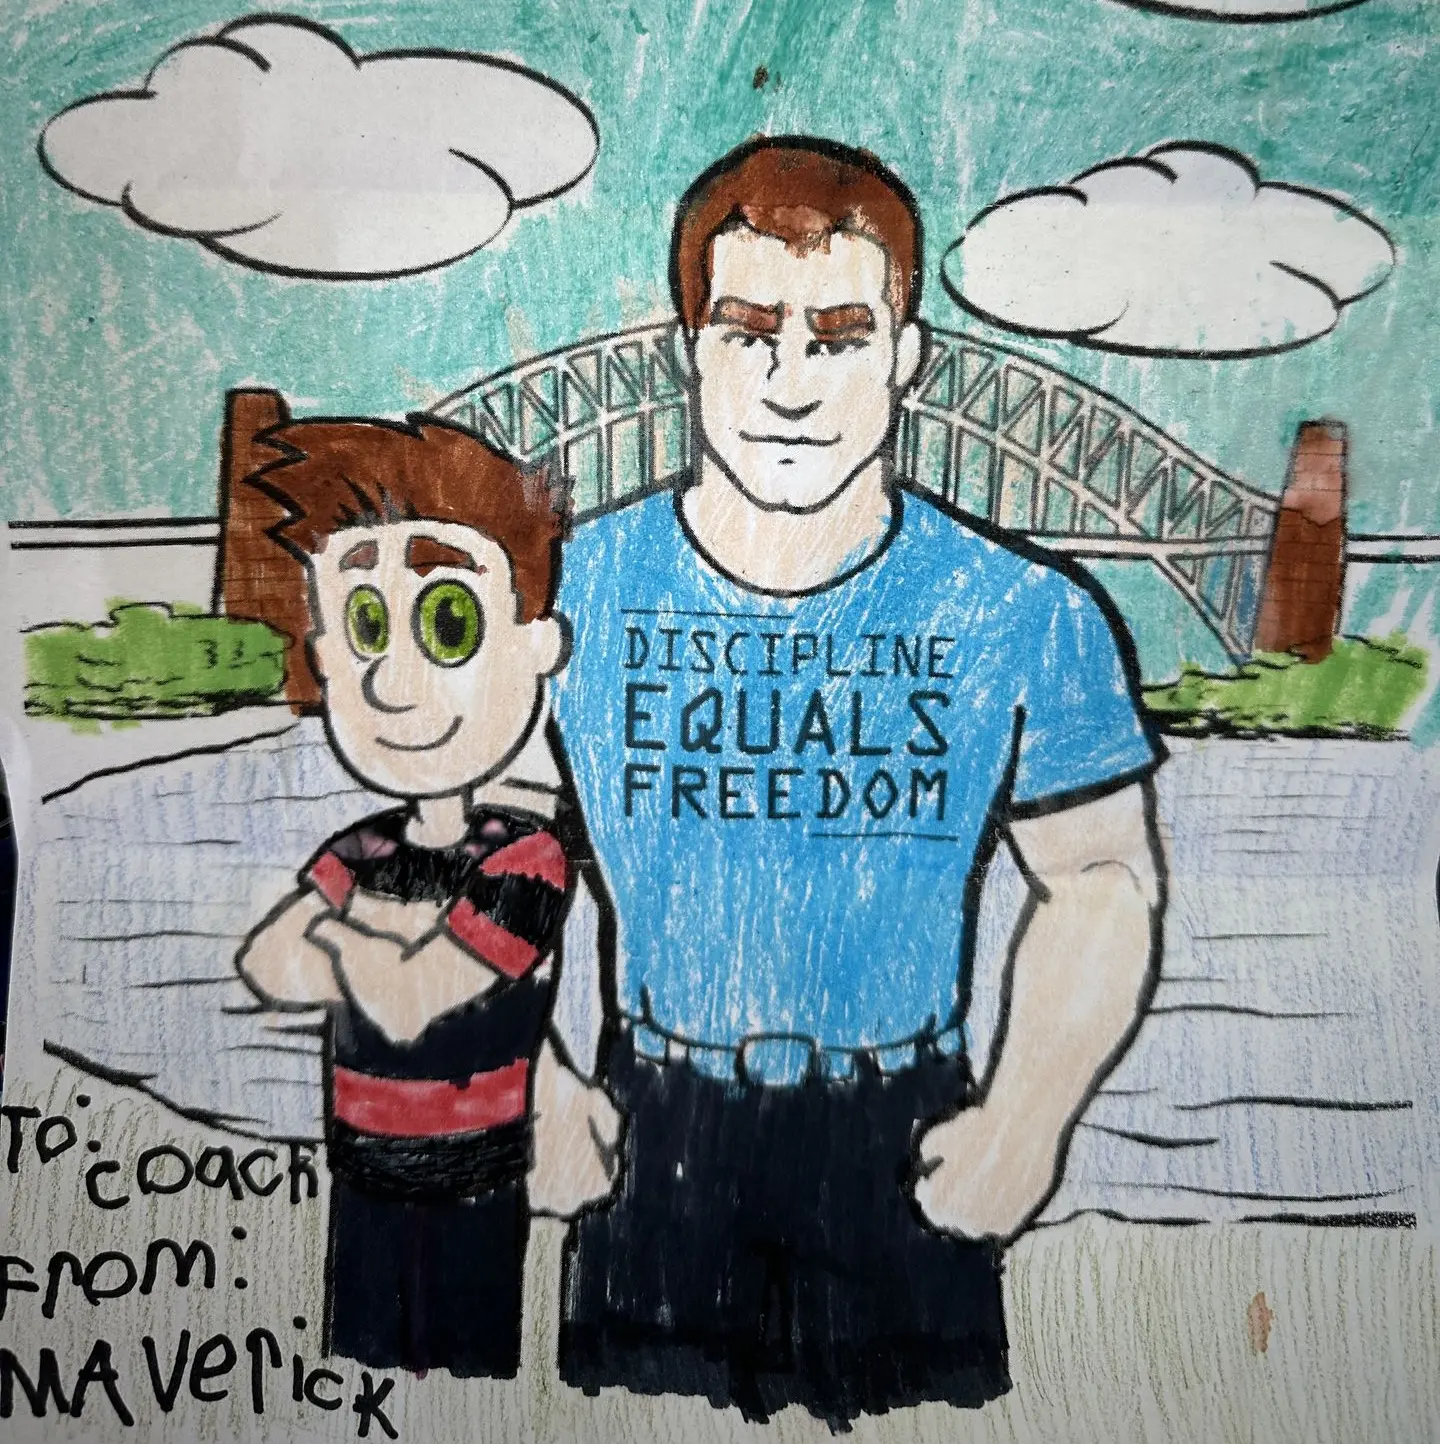 To Coach From Maverick Picture drawn from 5 year old wrestler